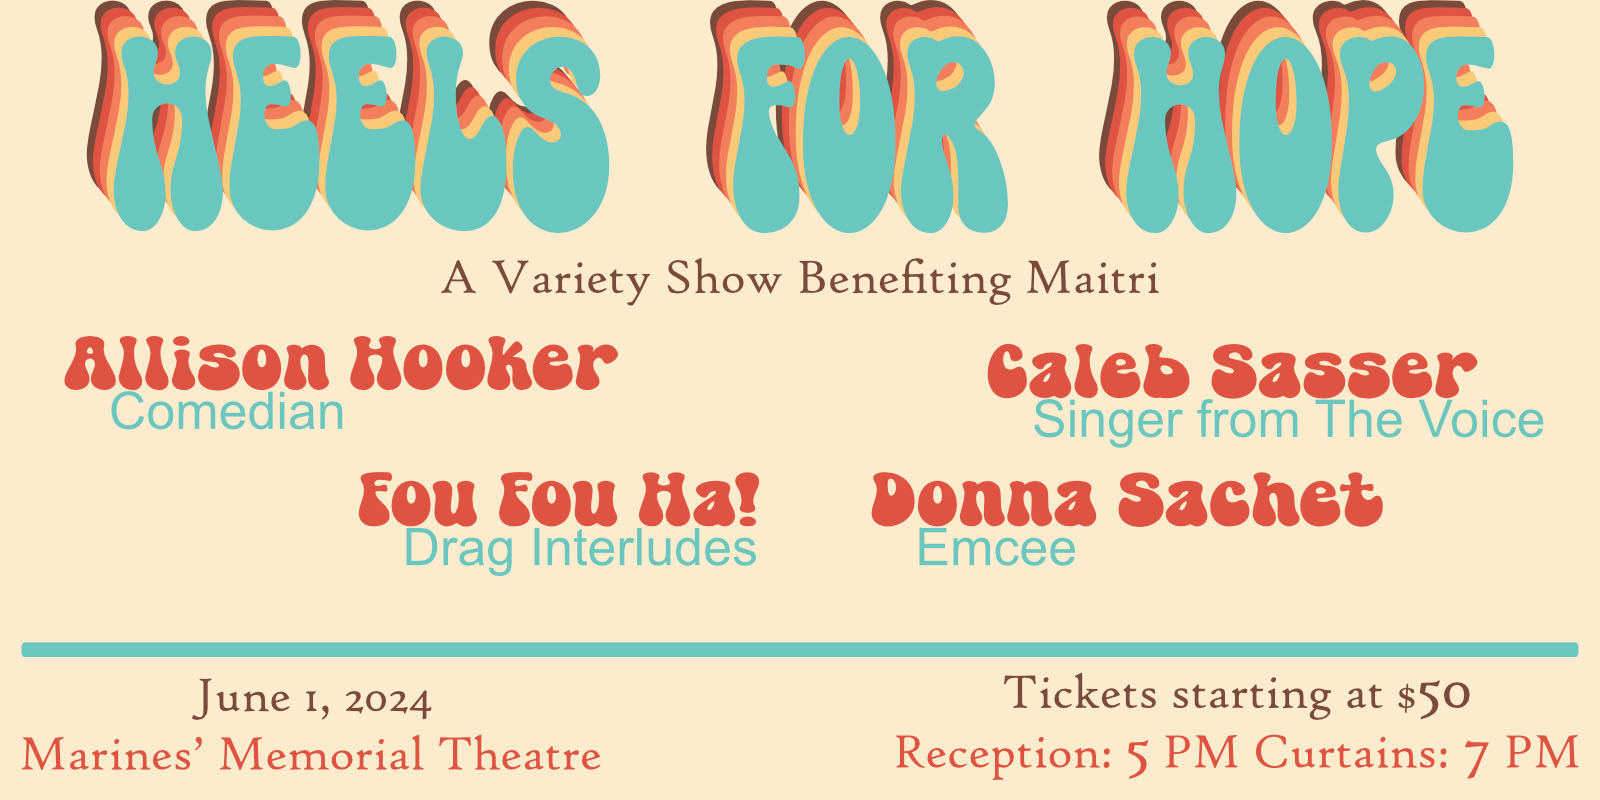 Heels for Hope: A Variety Show Fundraiser for Maitri